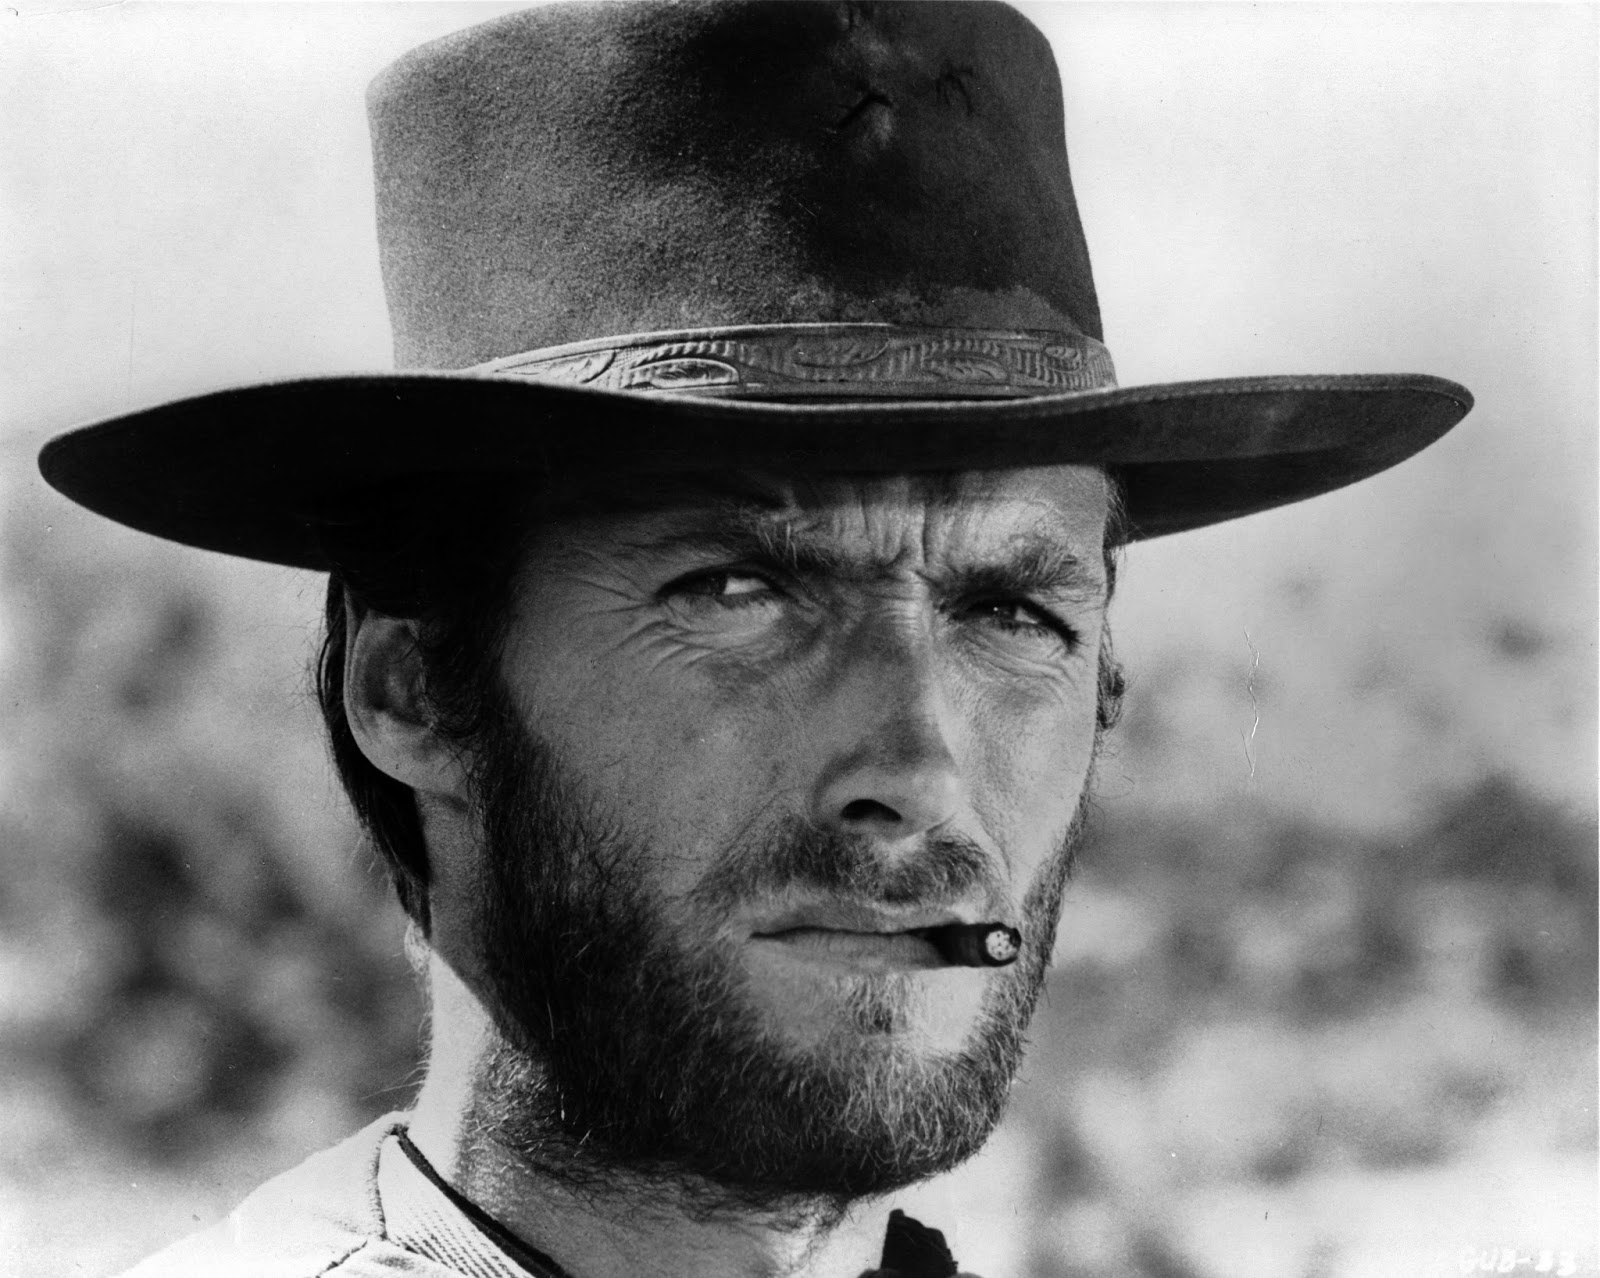 Behind the scenes photos from the iconic film The Good, the Bad and the Ugly